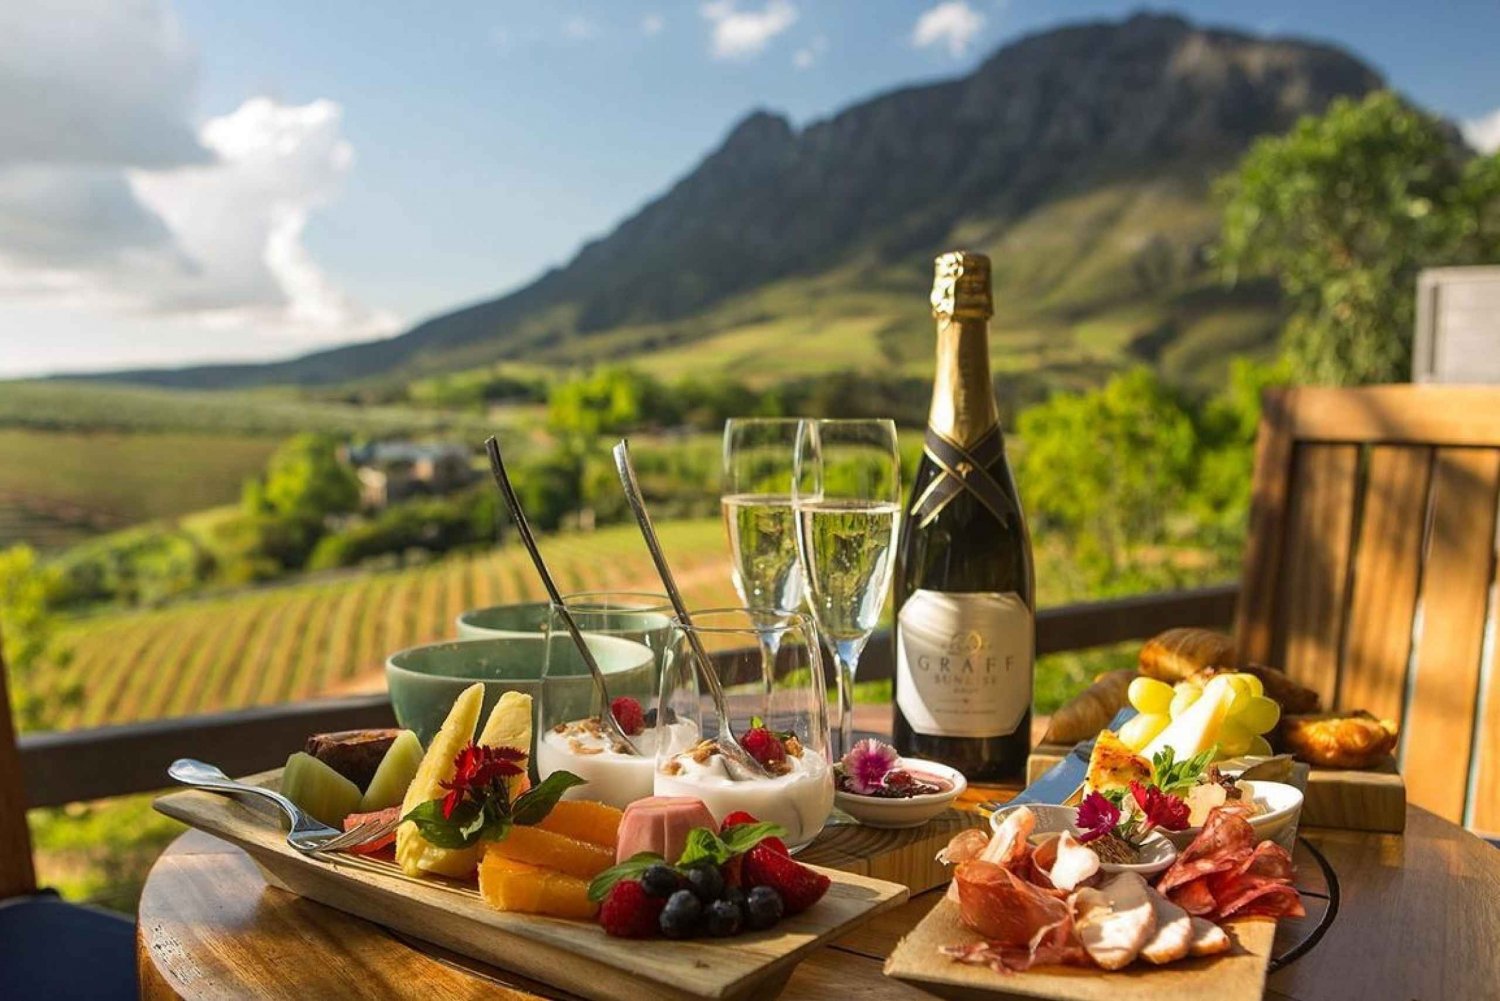 A full-day Private Tour of the Cape Winelands & Franschhoek